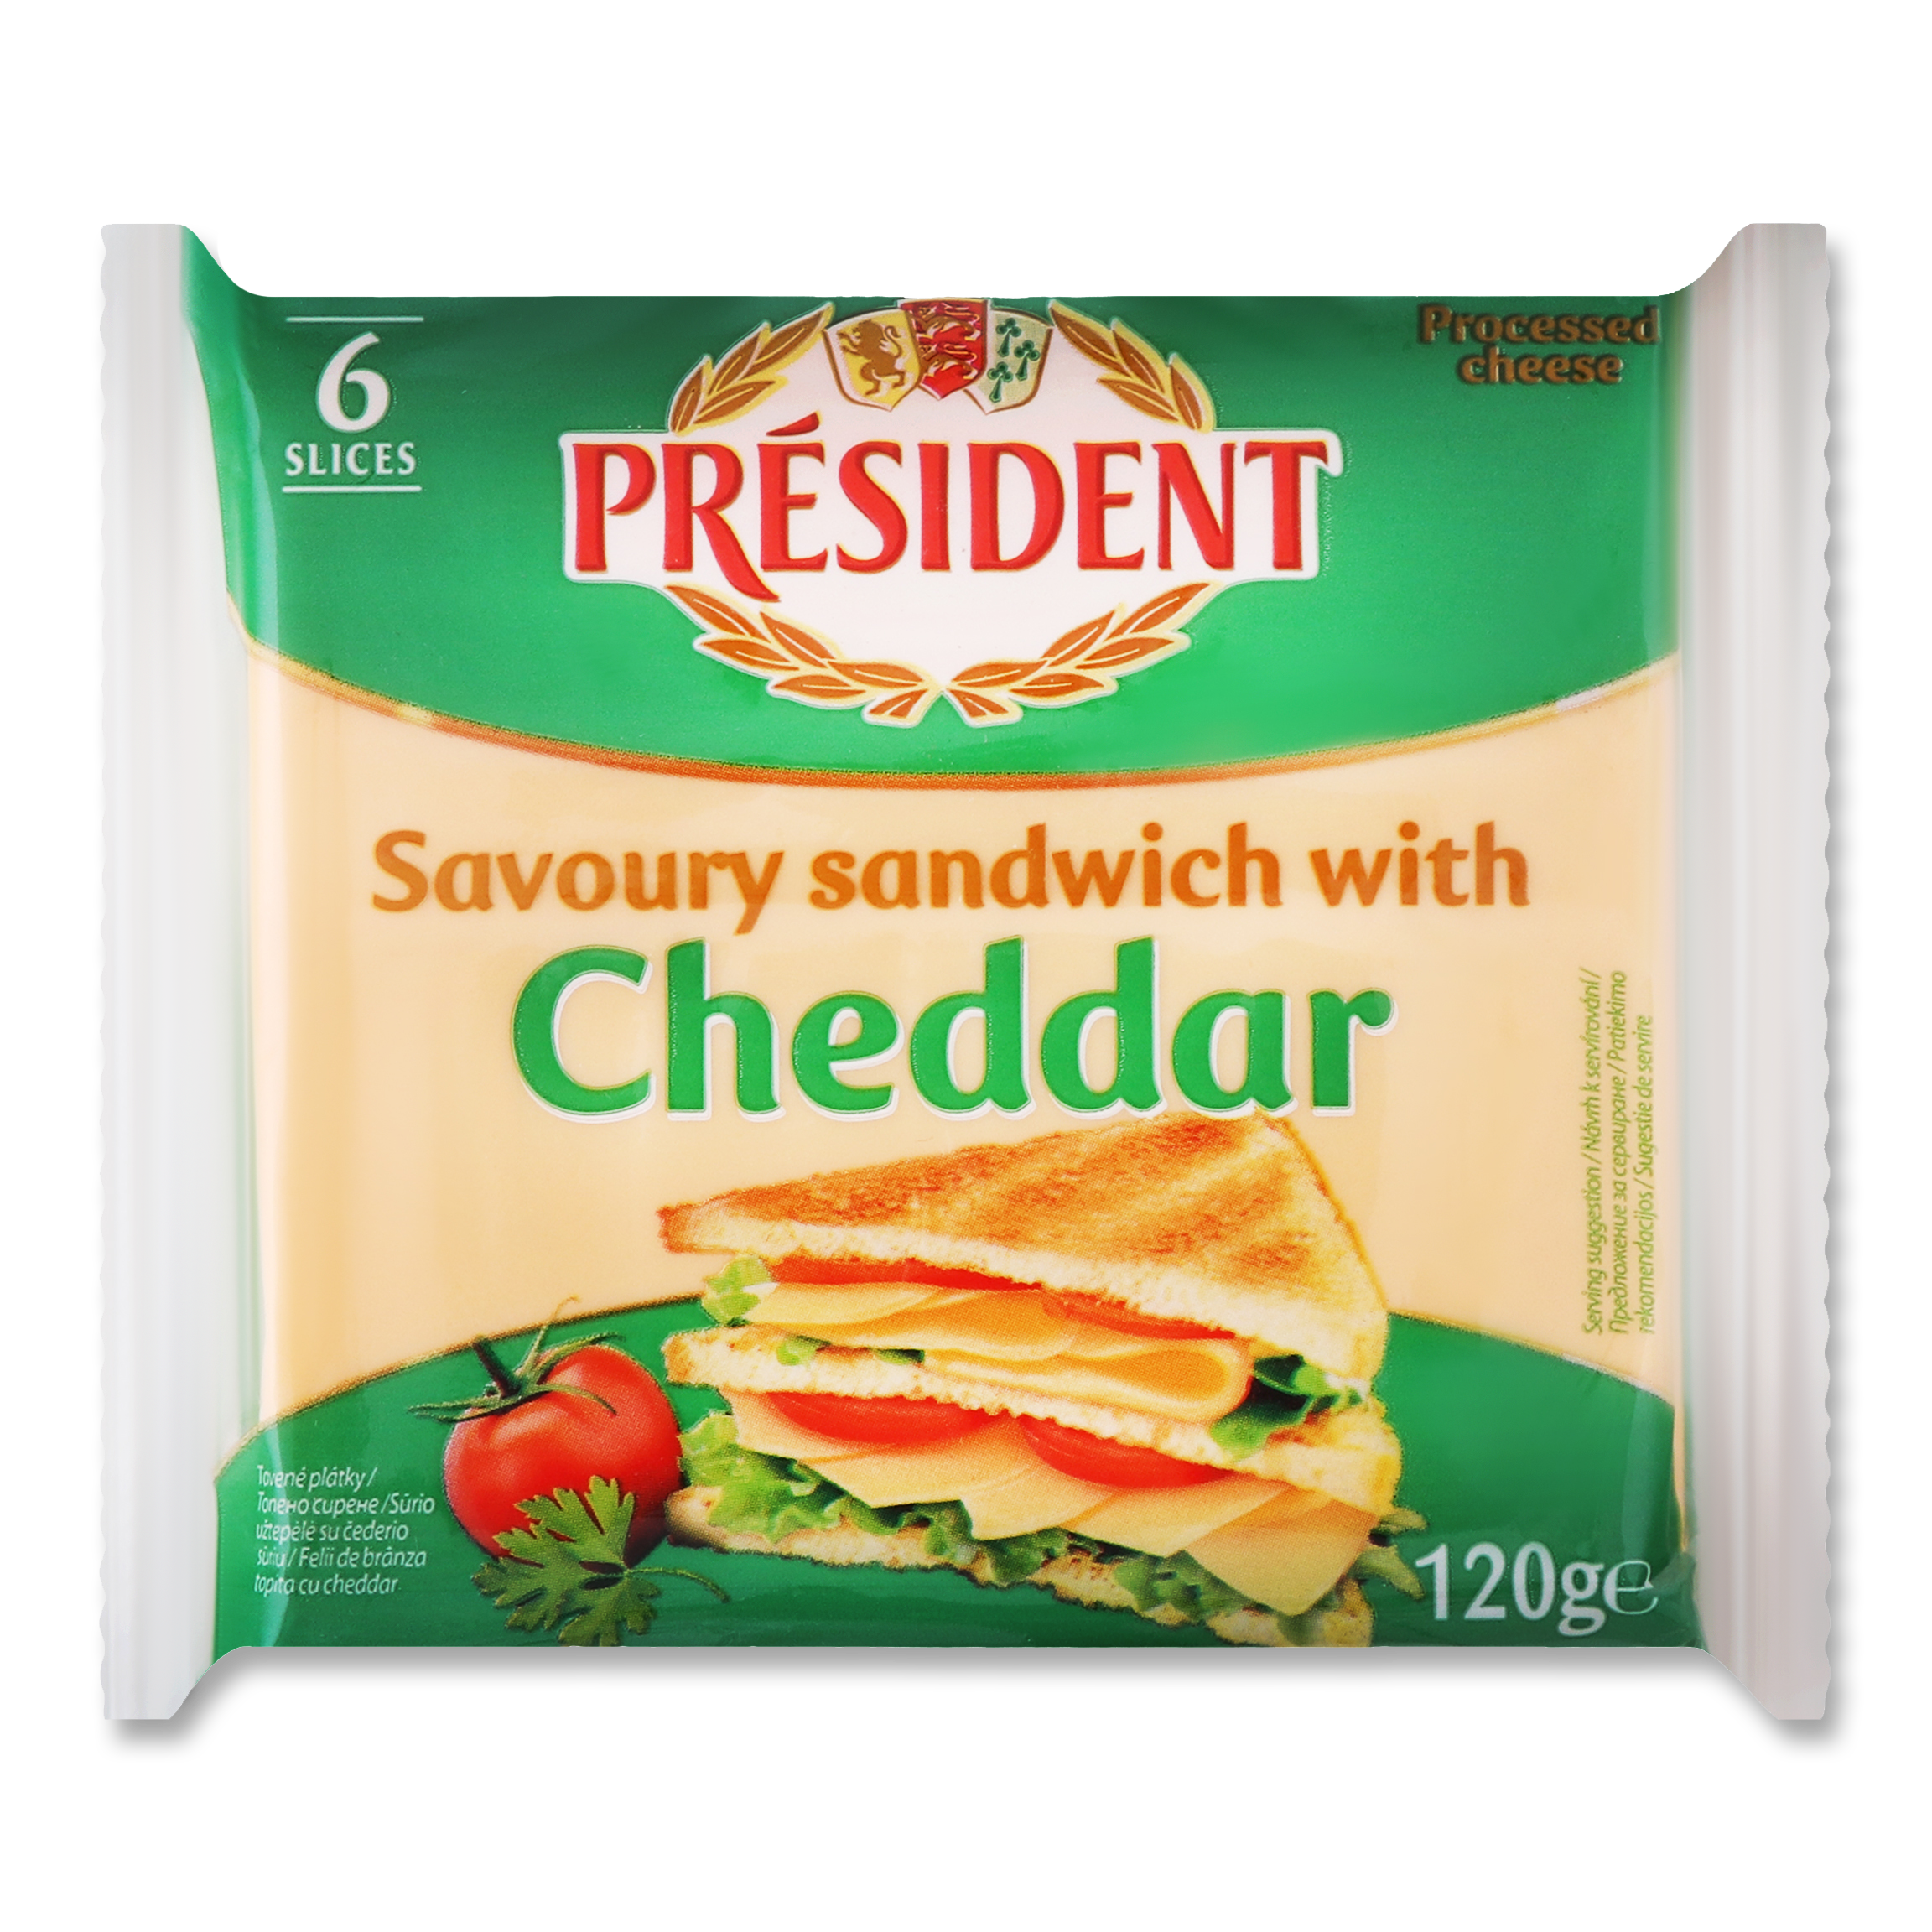 President Cheddar Cheese Processed 40% 120g